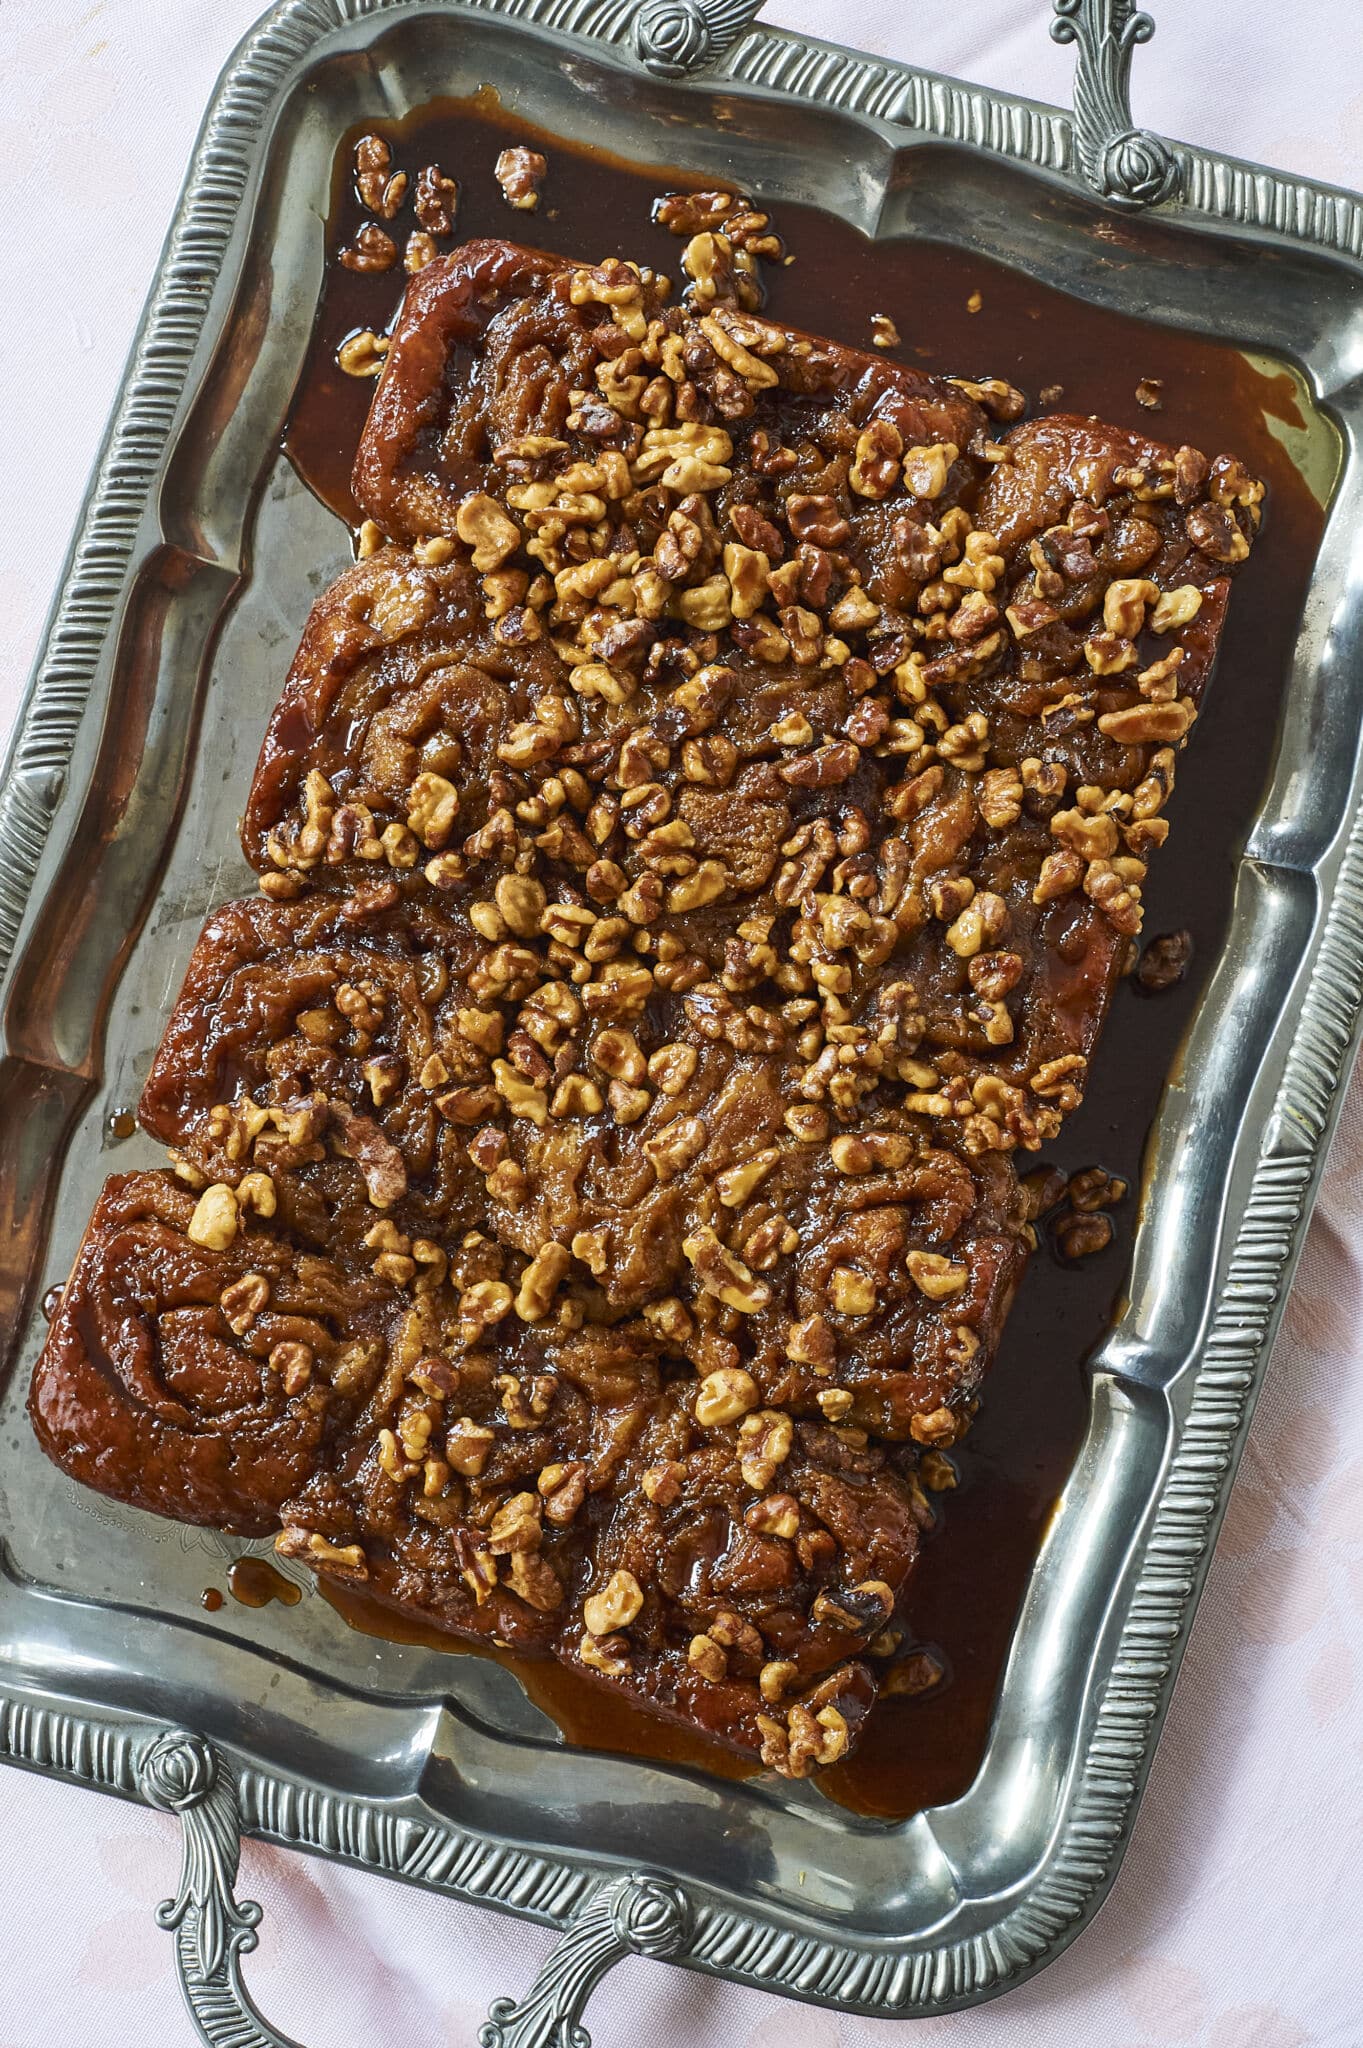 Soft and fluffy cinnamon rolls are packed with bananas and baked golden-brown, served in a silver rectangular plater, topped with toasted walnuts and smooth decadent caramel sauce. 